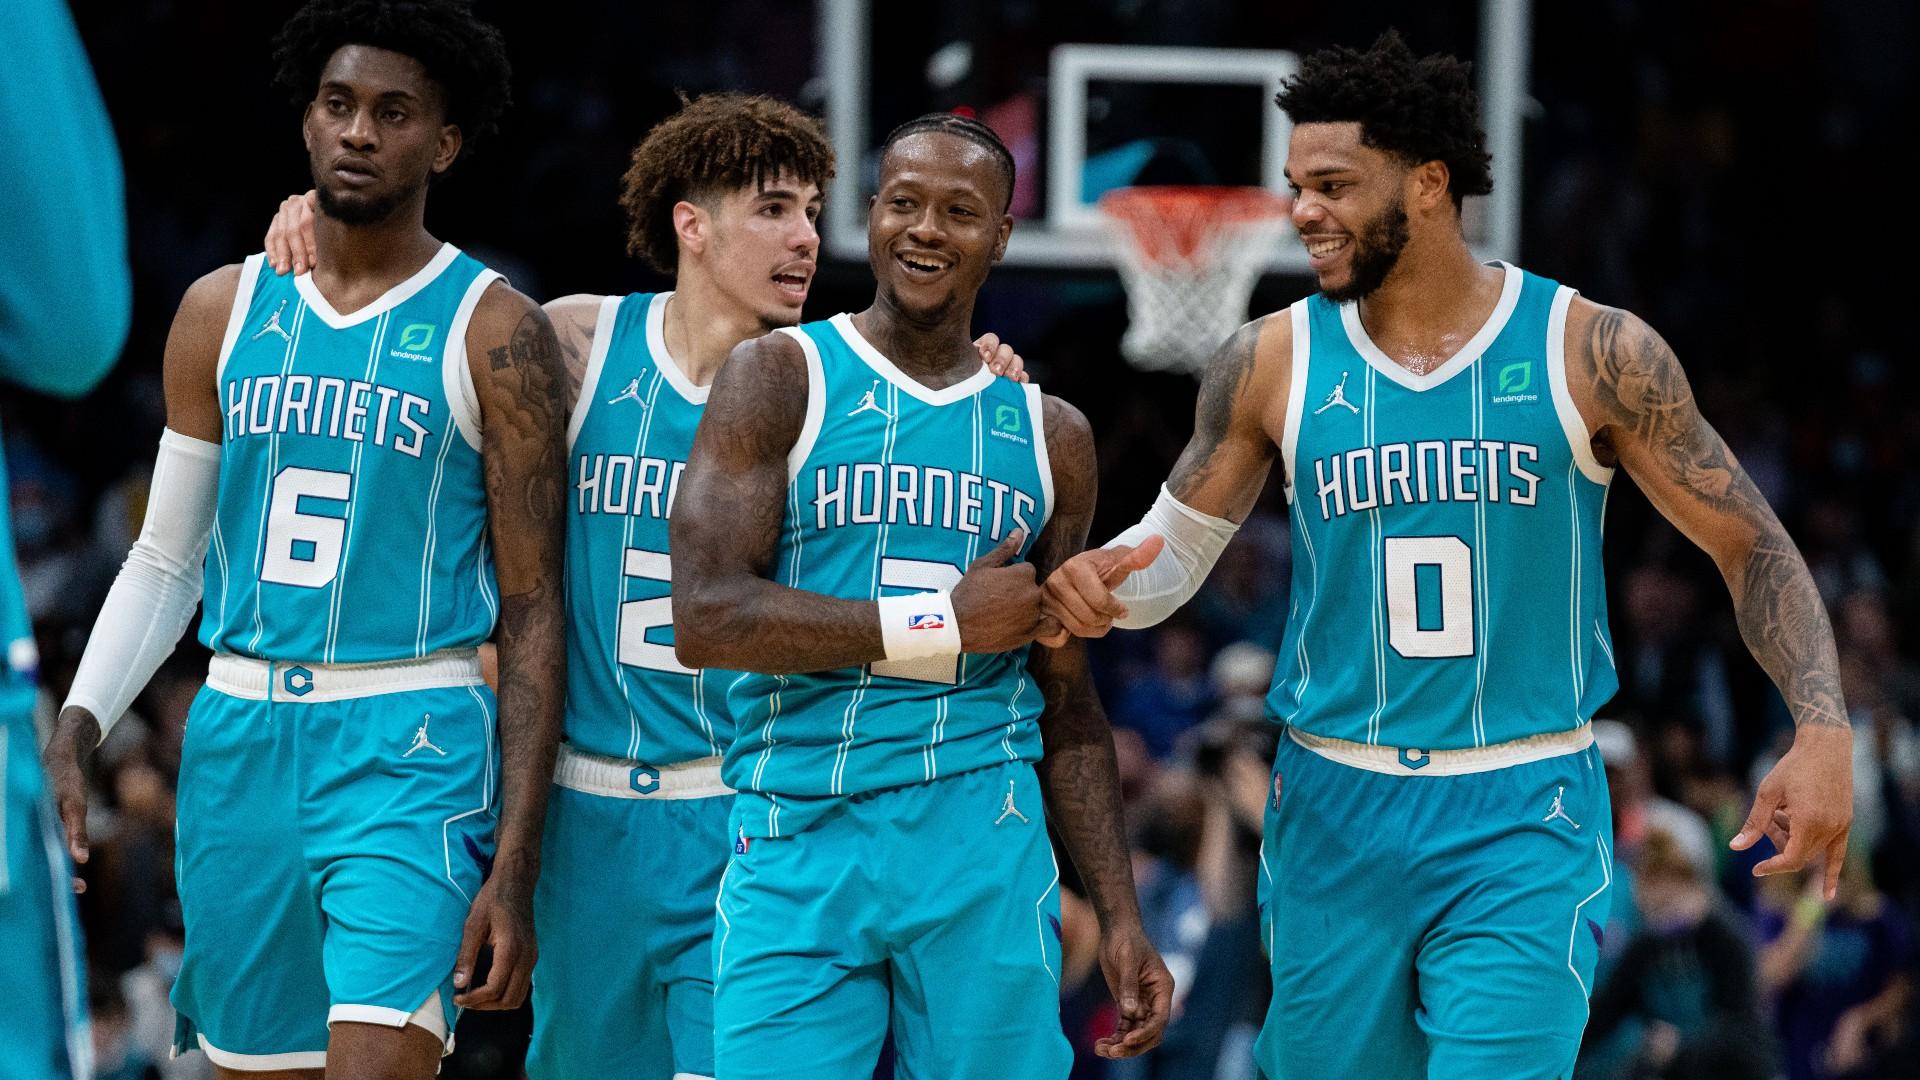 Charlotte Hornets' Future: Building Around LaMelo Ball